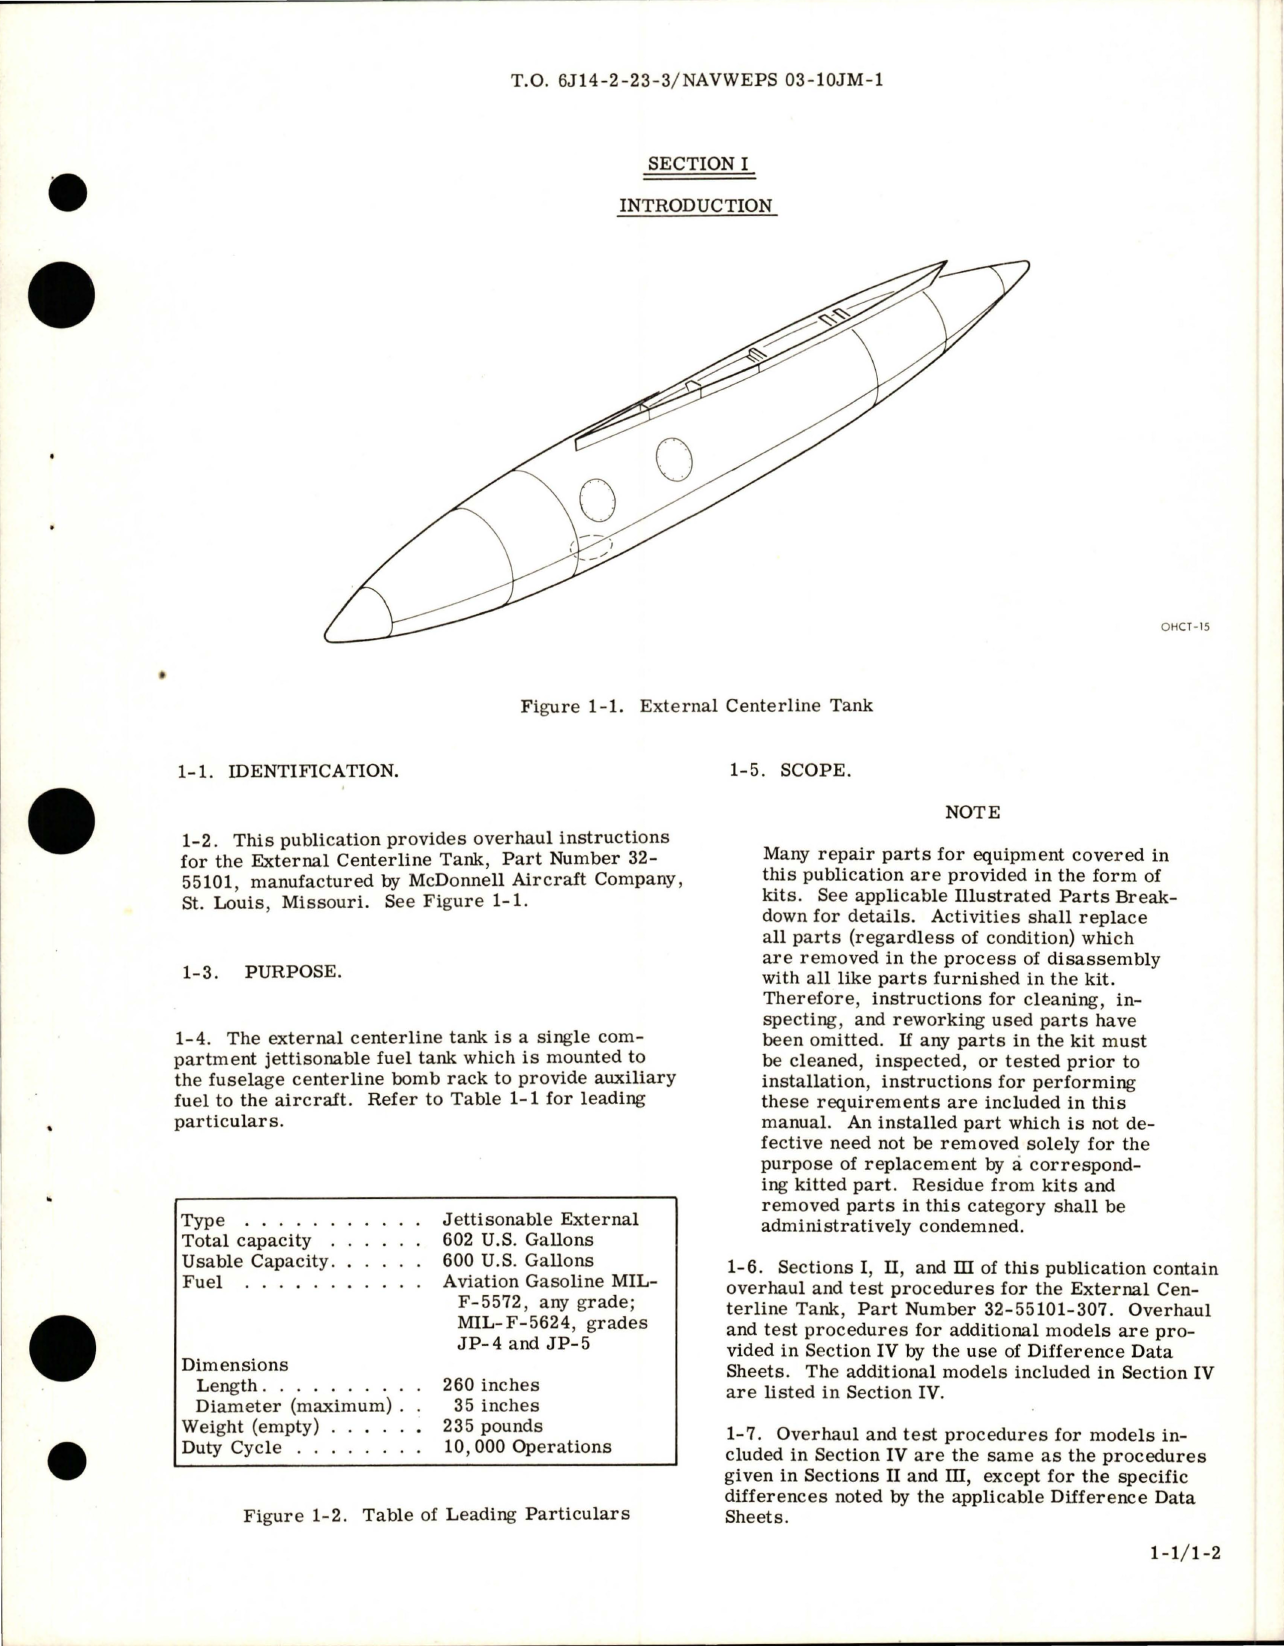 Sample page 5 from AirCorps Library document: Overhaul Manual for External Centerline Fuel Tank